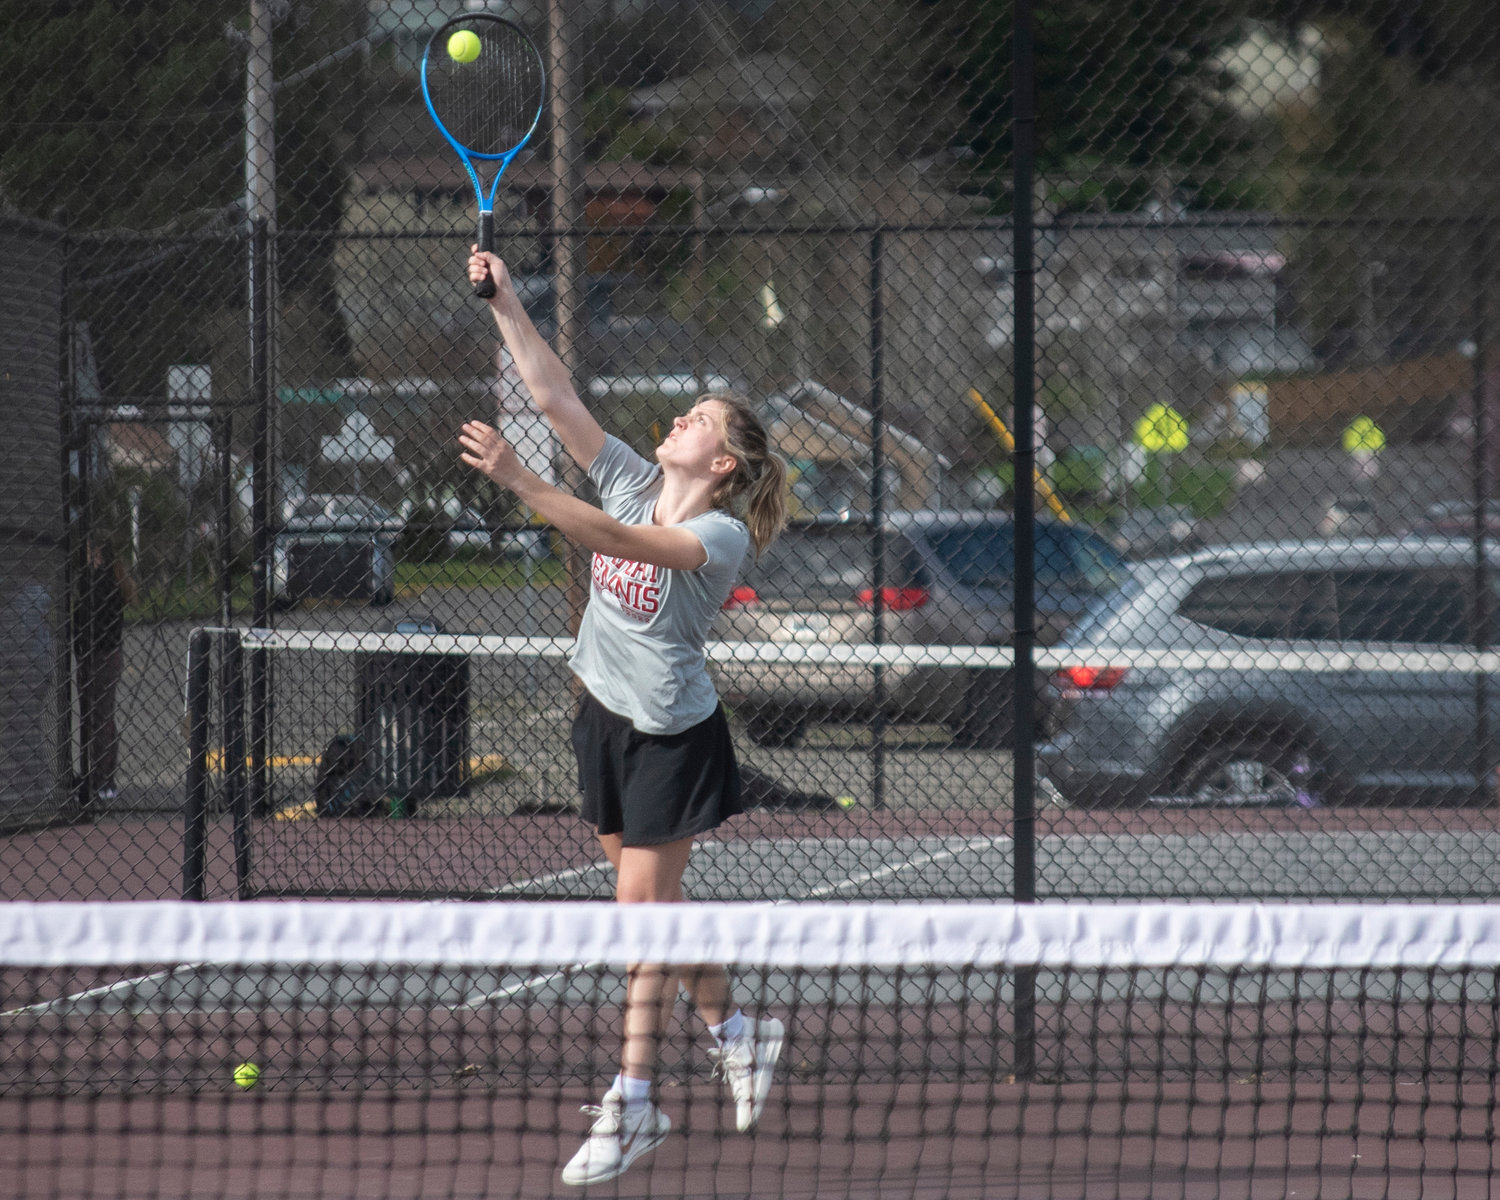 W.F. West’s first doubles player Kaylynne Dowling serves the ball during a match against Black Hills in Chehalis on Wednesday afternoon.